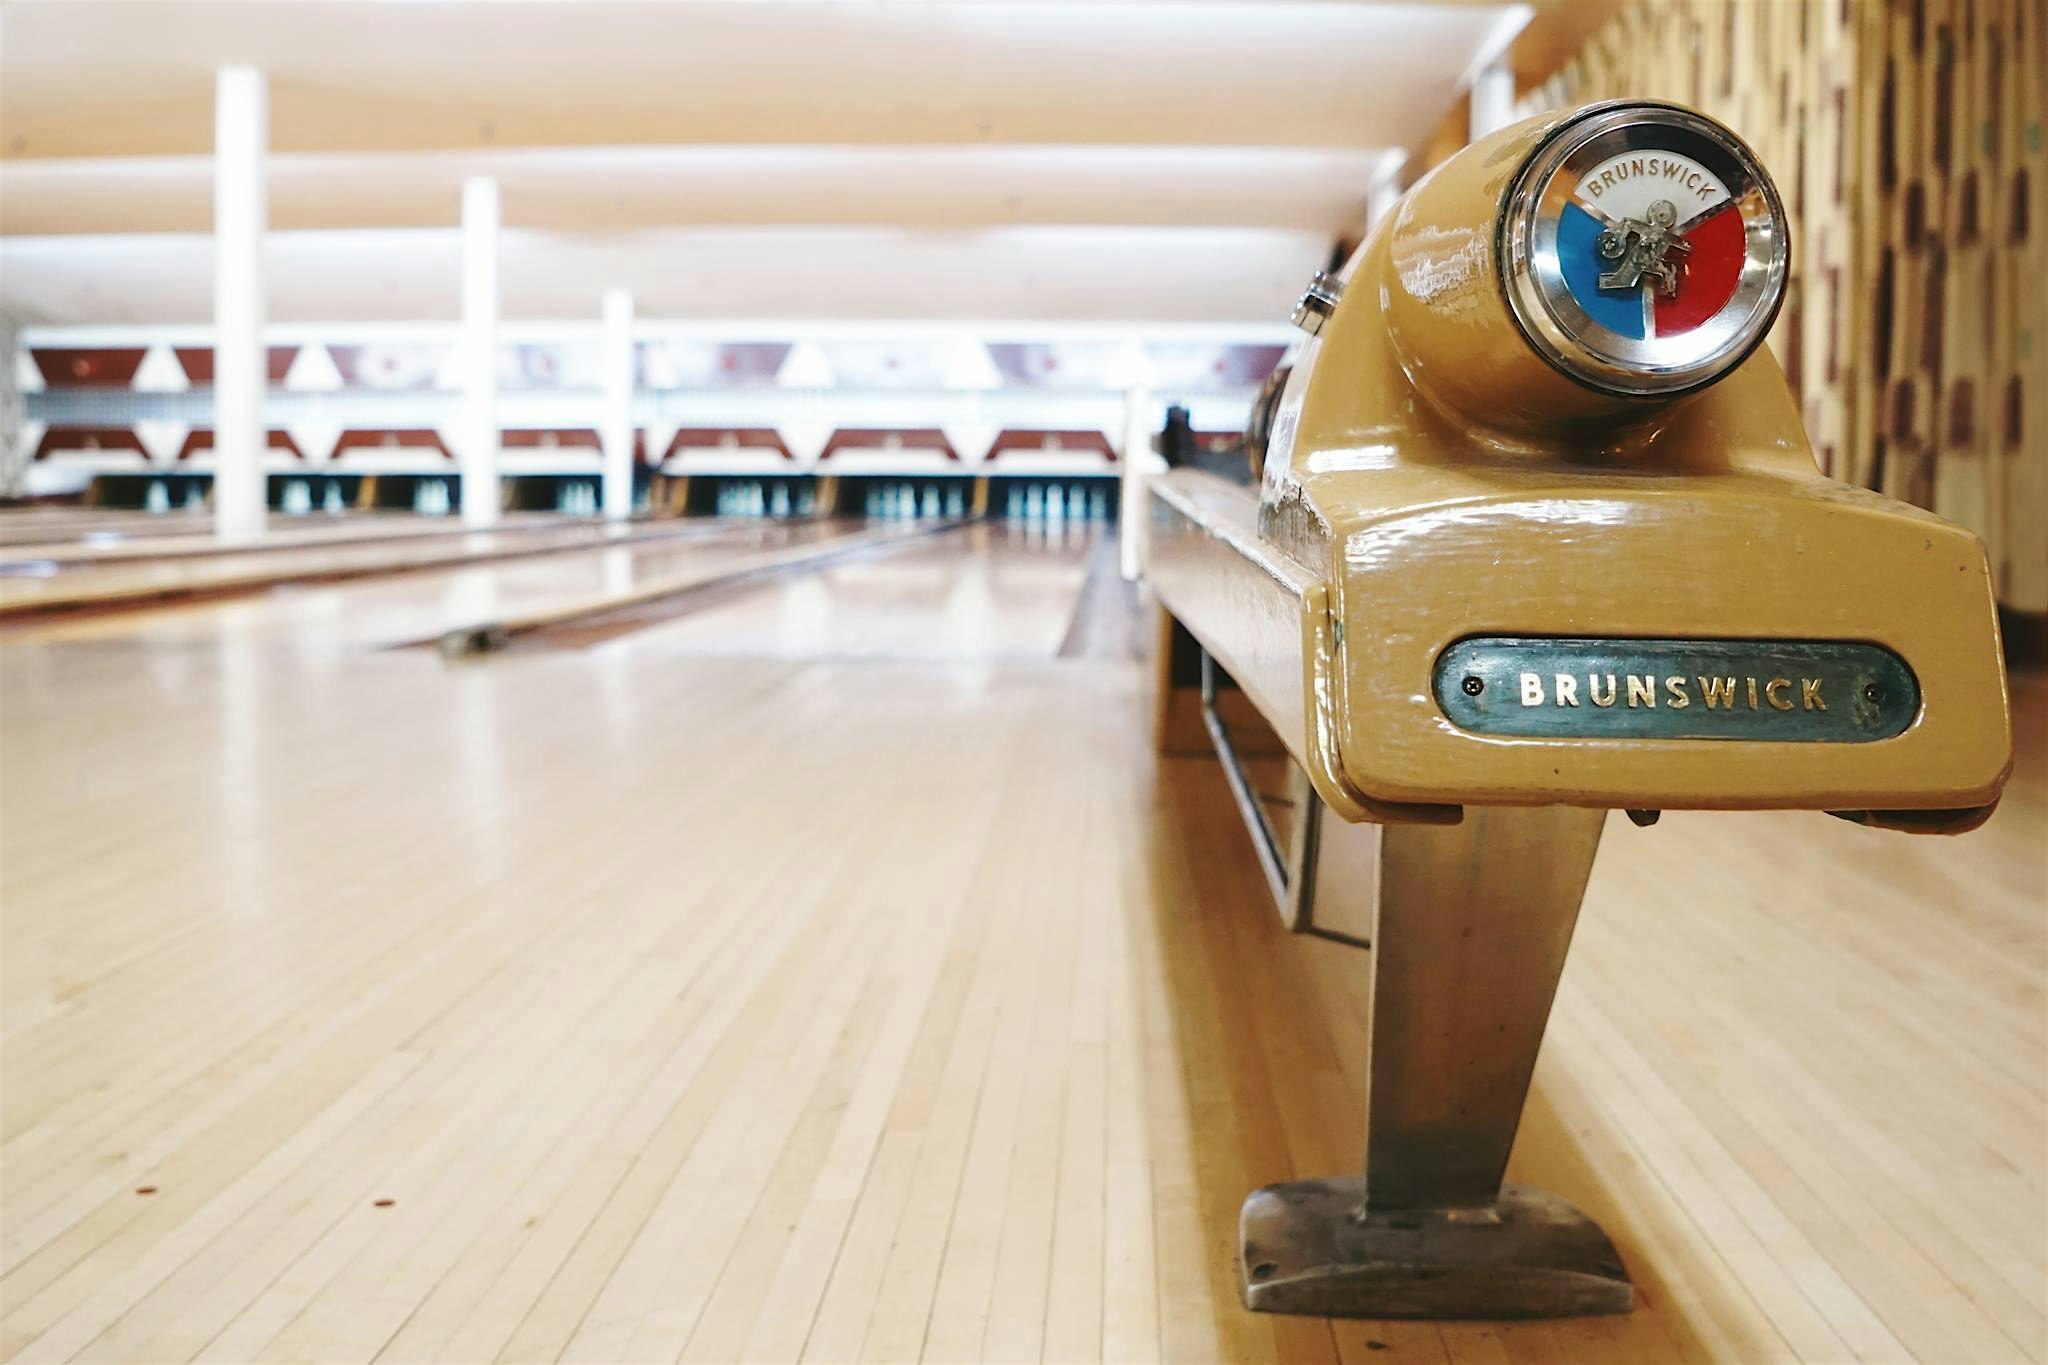 Singles Pizza & Bowling Night at Plaza Bowl - Ages 25+